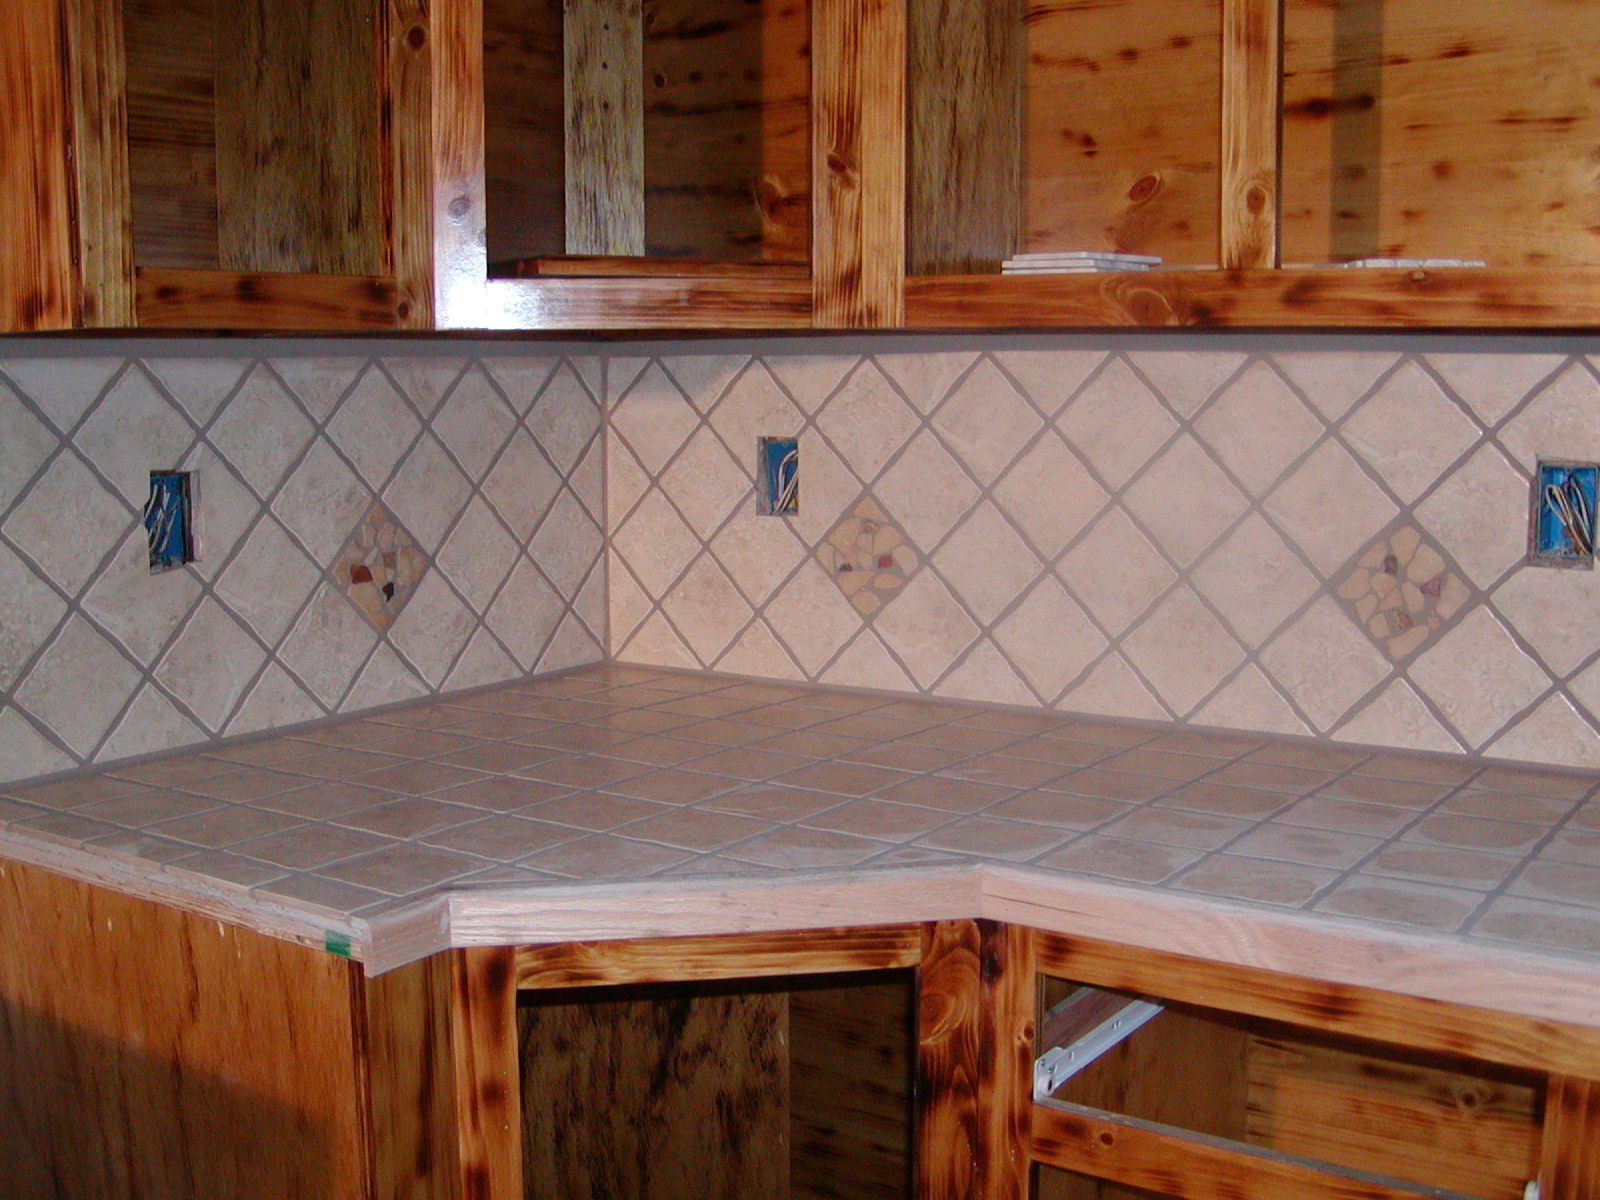 Tile That Jack Plowman And Chip Bellamy Installed On The Kitchen Counters. Really Turned Out Great.